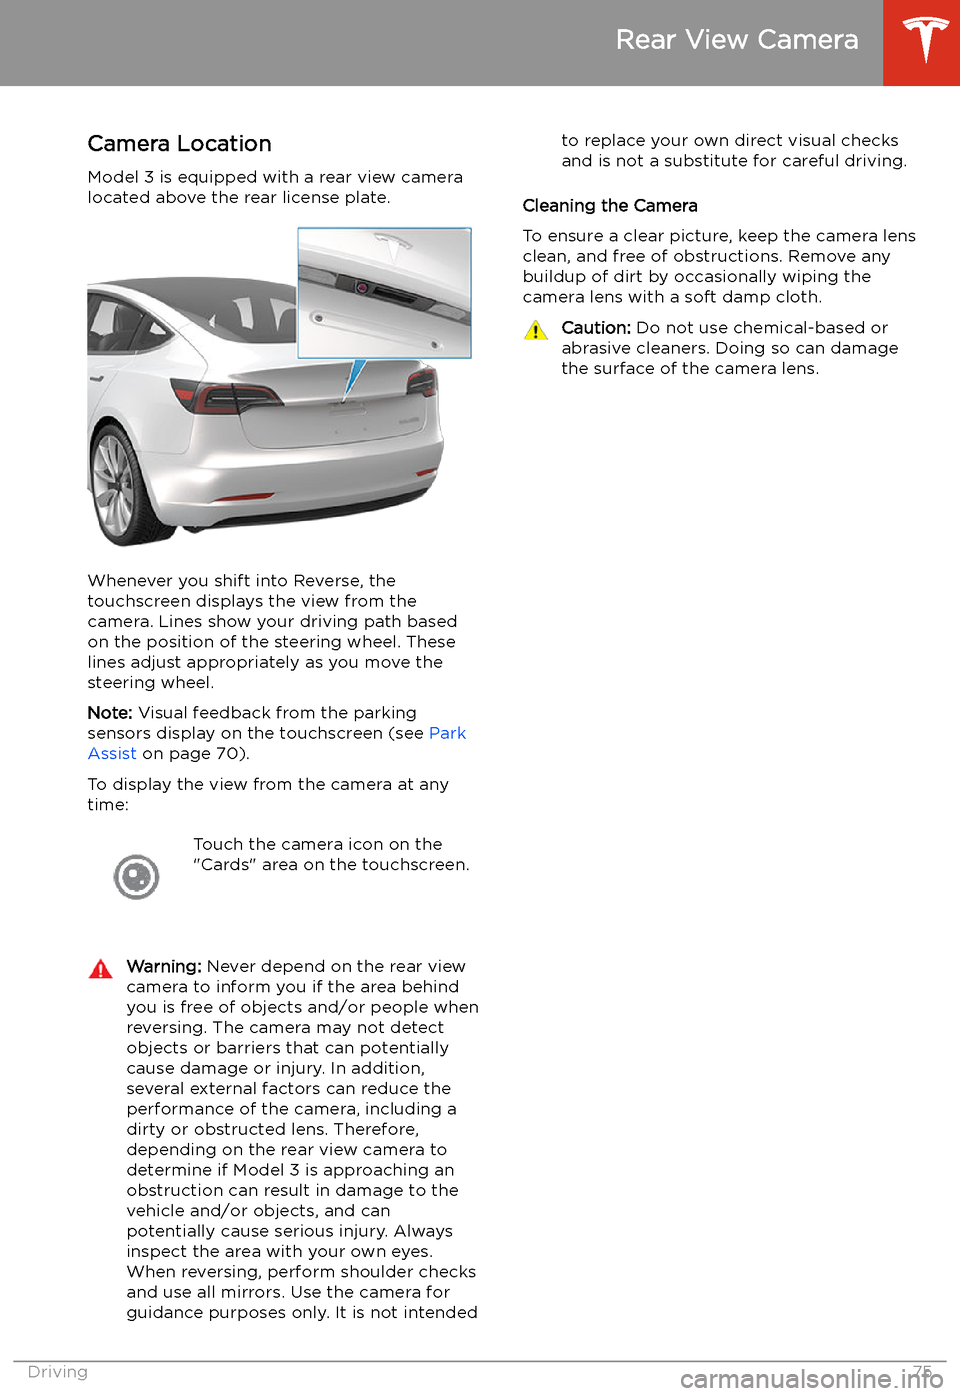 TESLA MODEL 3 2020  s Manual PDF Rear View Camera
Camera Location
Model 3 is equipped with a rear view camera
located above the rear license plate.
Whenever you shift into Reverse, the
touchscreen displays the view from the
camera. L